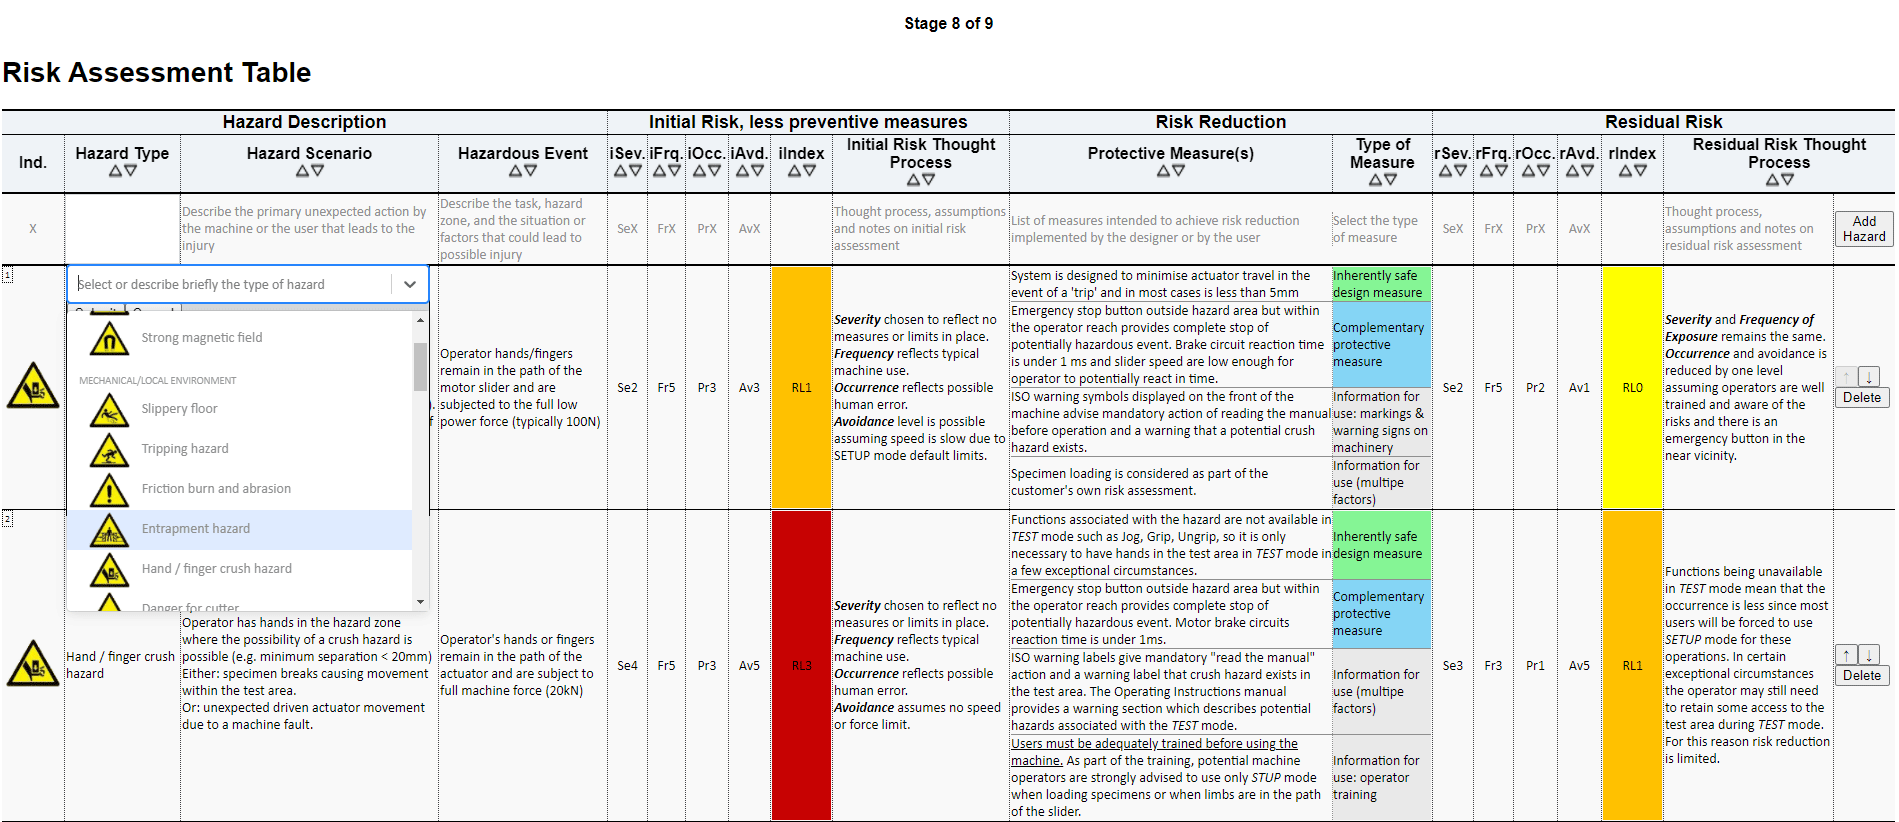 application stage 8 - hazards table